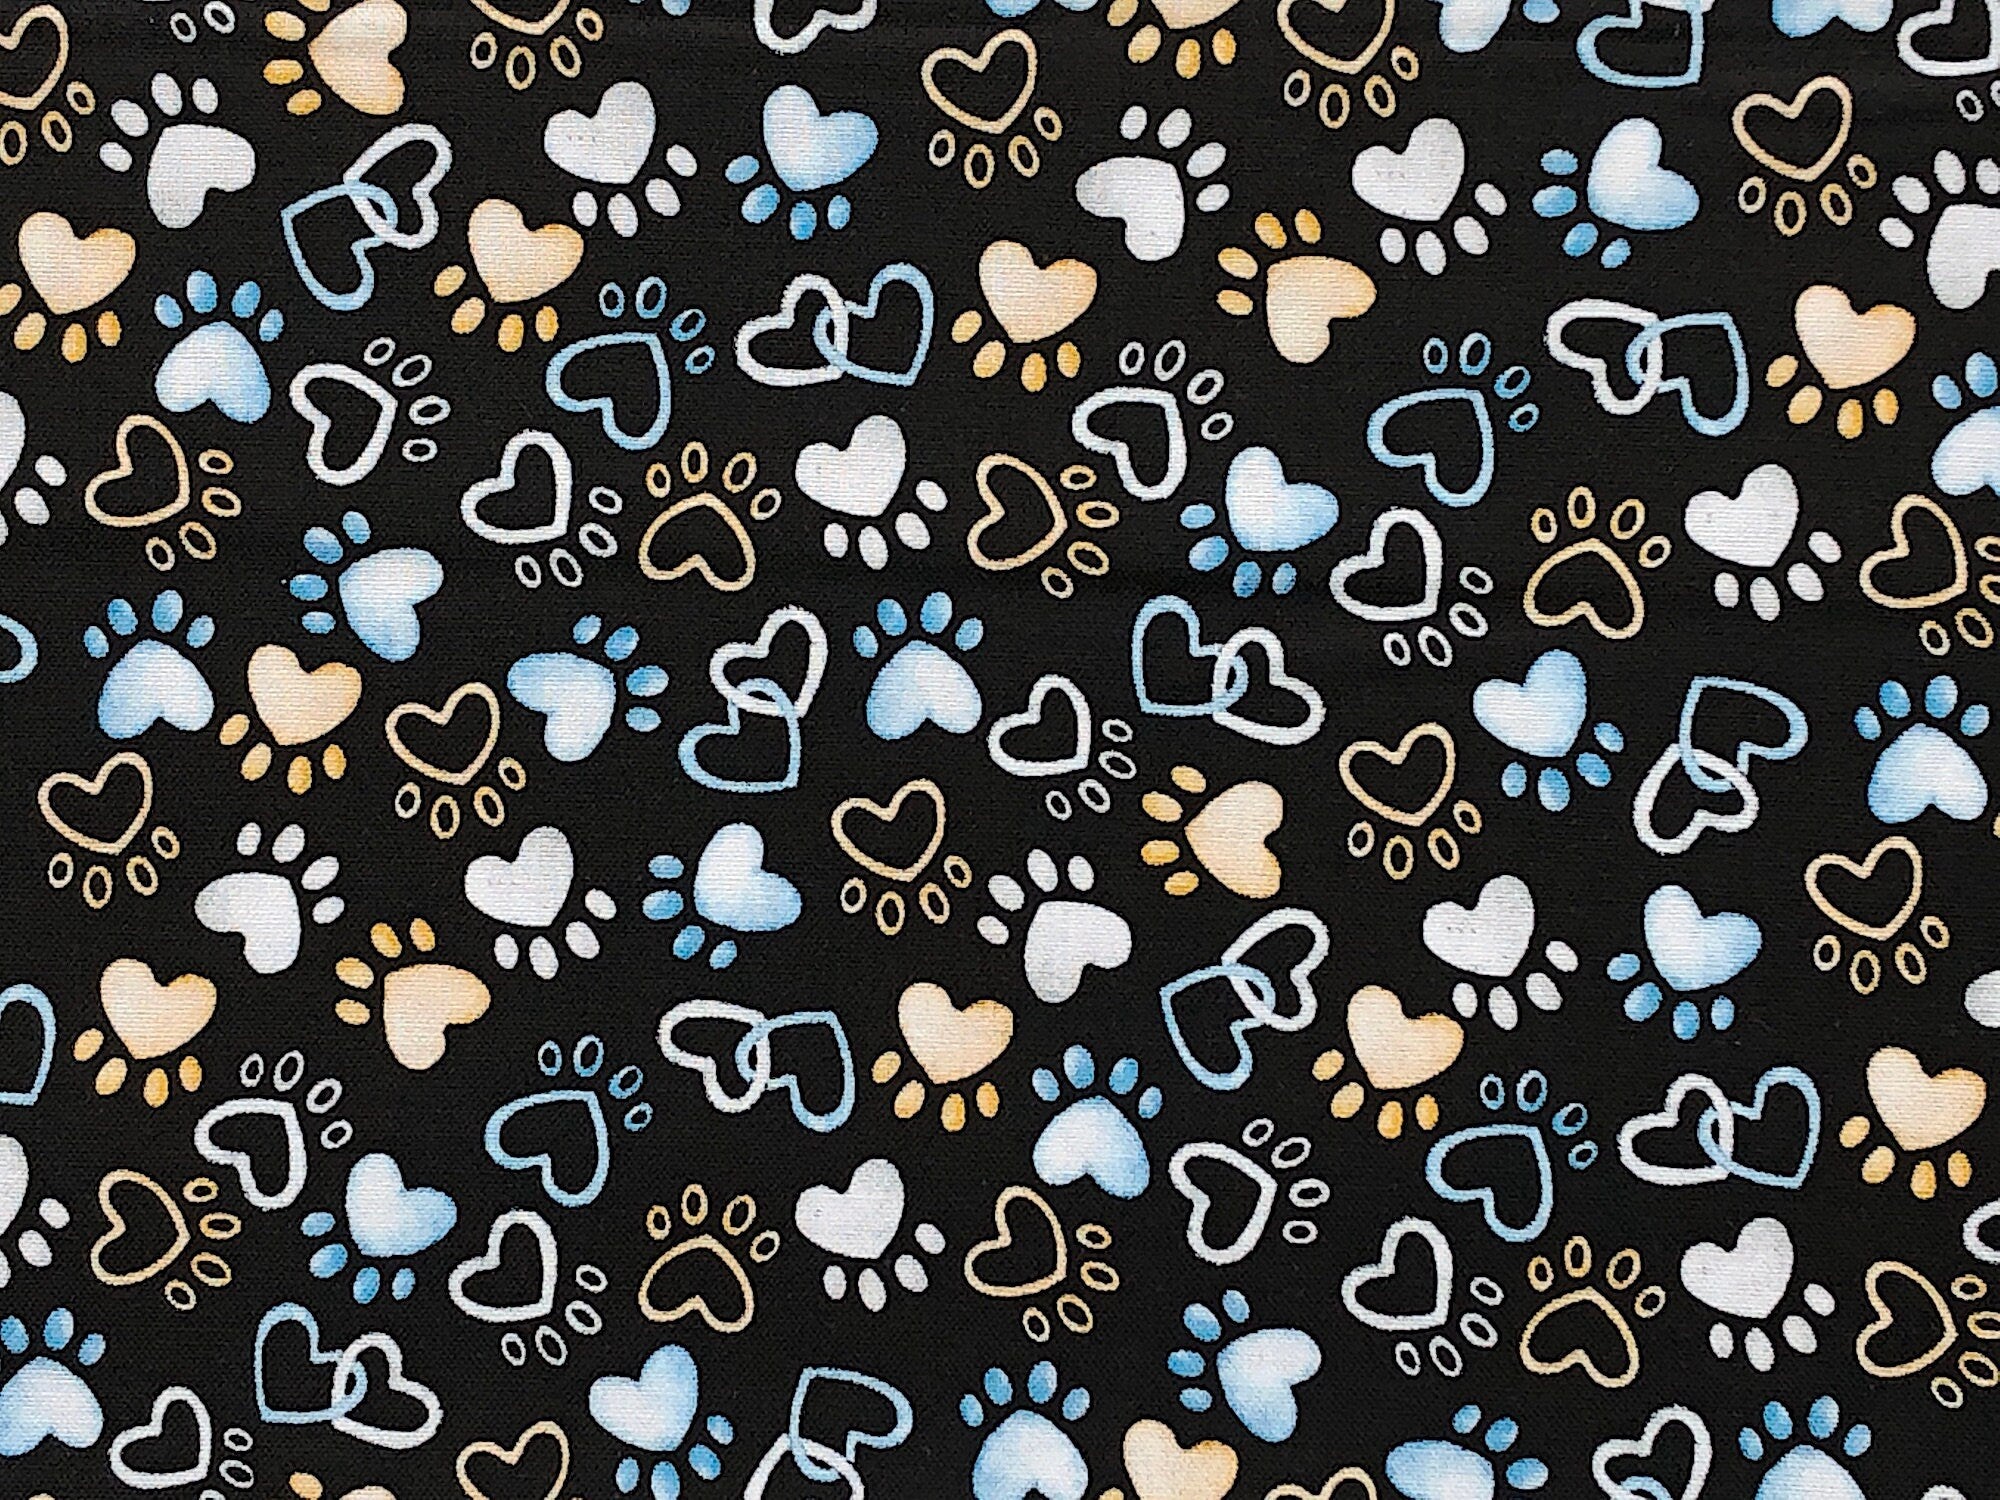 Close up of paw prints and hearts on a black background.